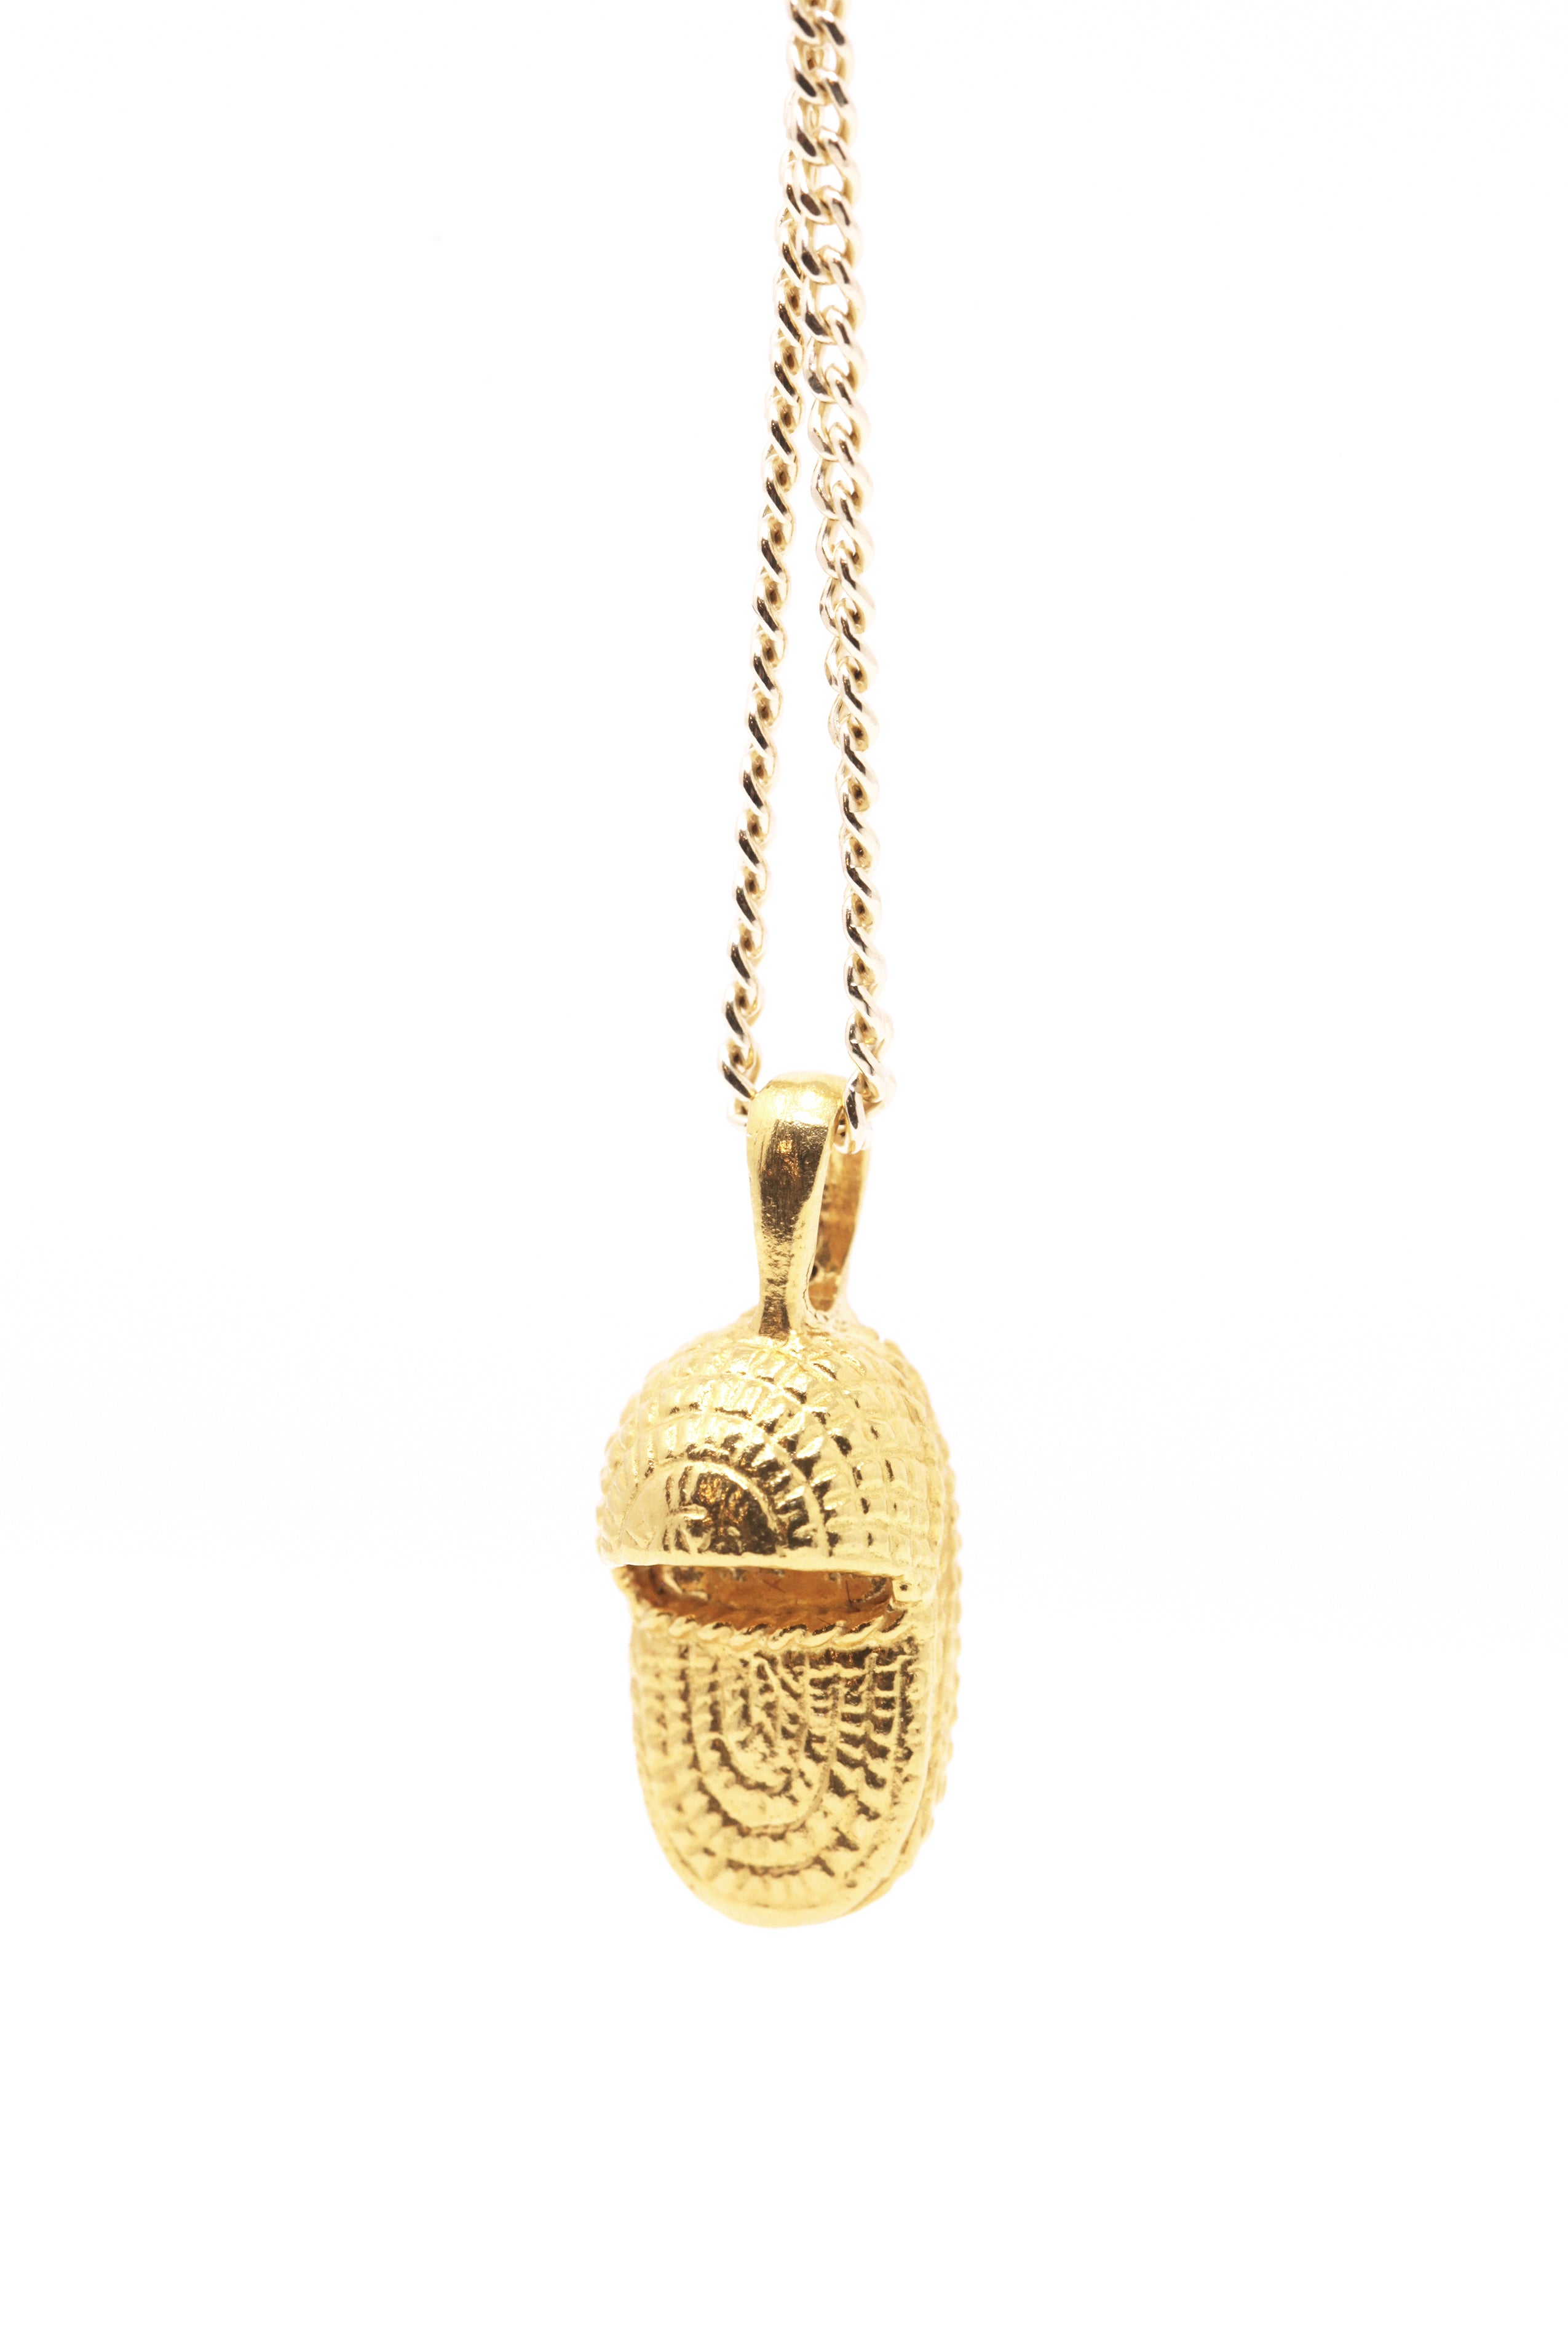 THE MOSES Basket Necklace